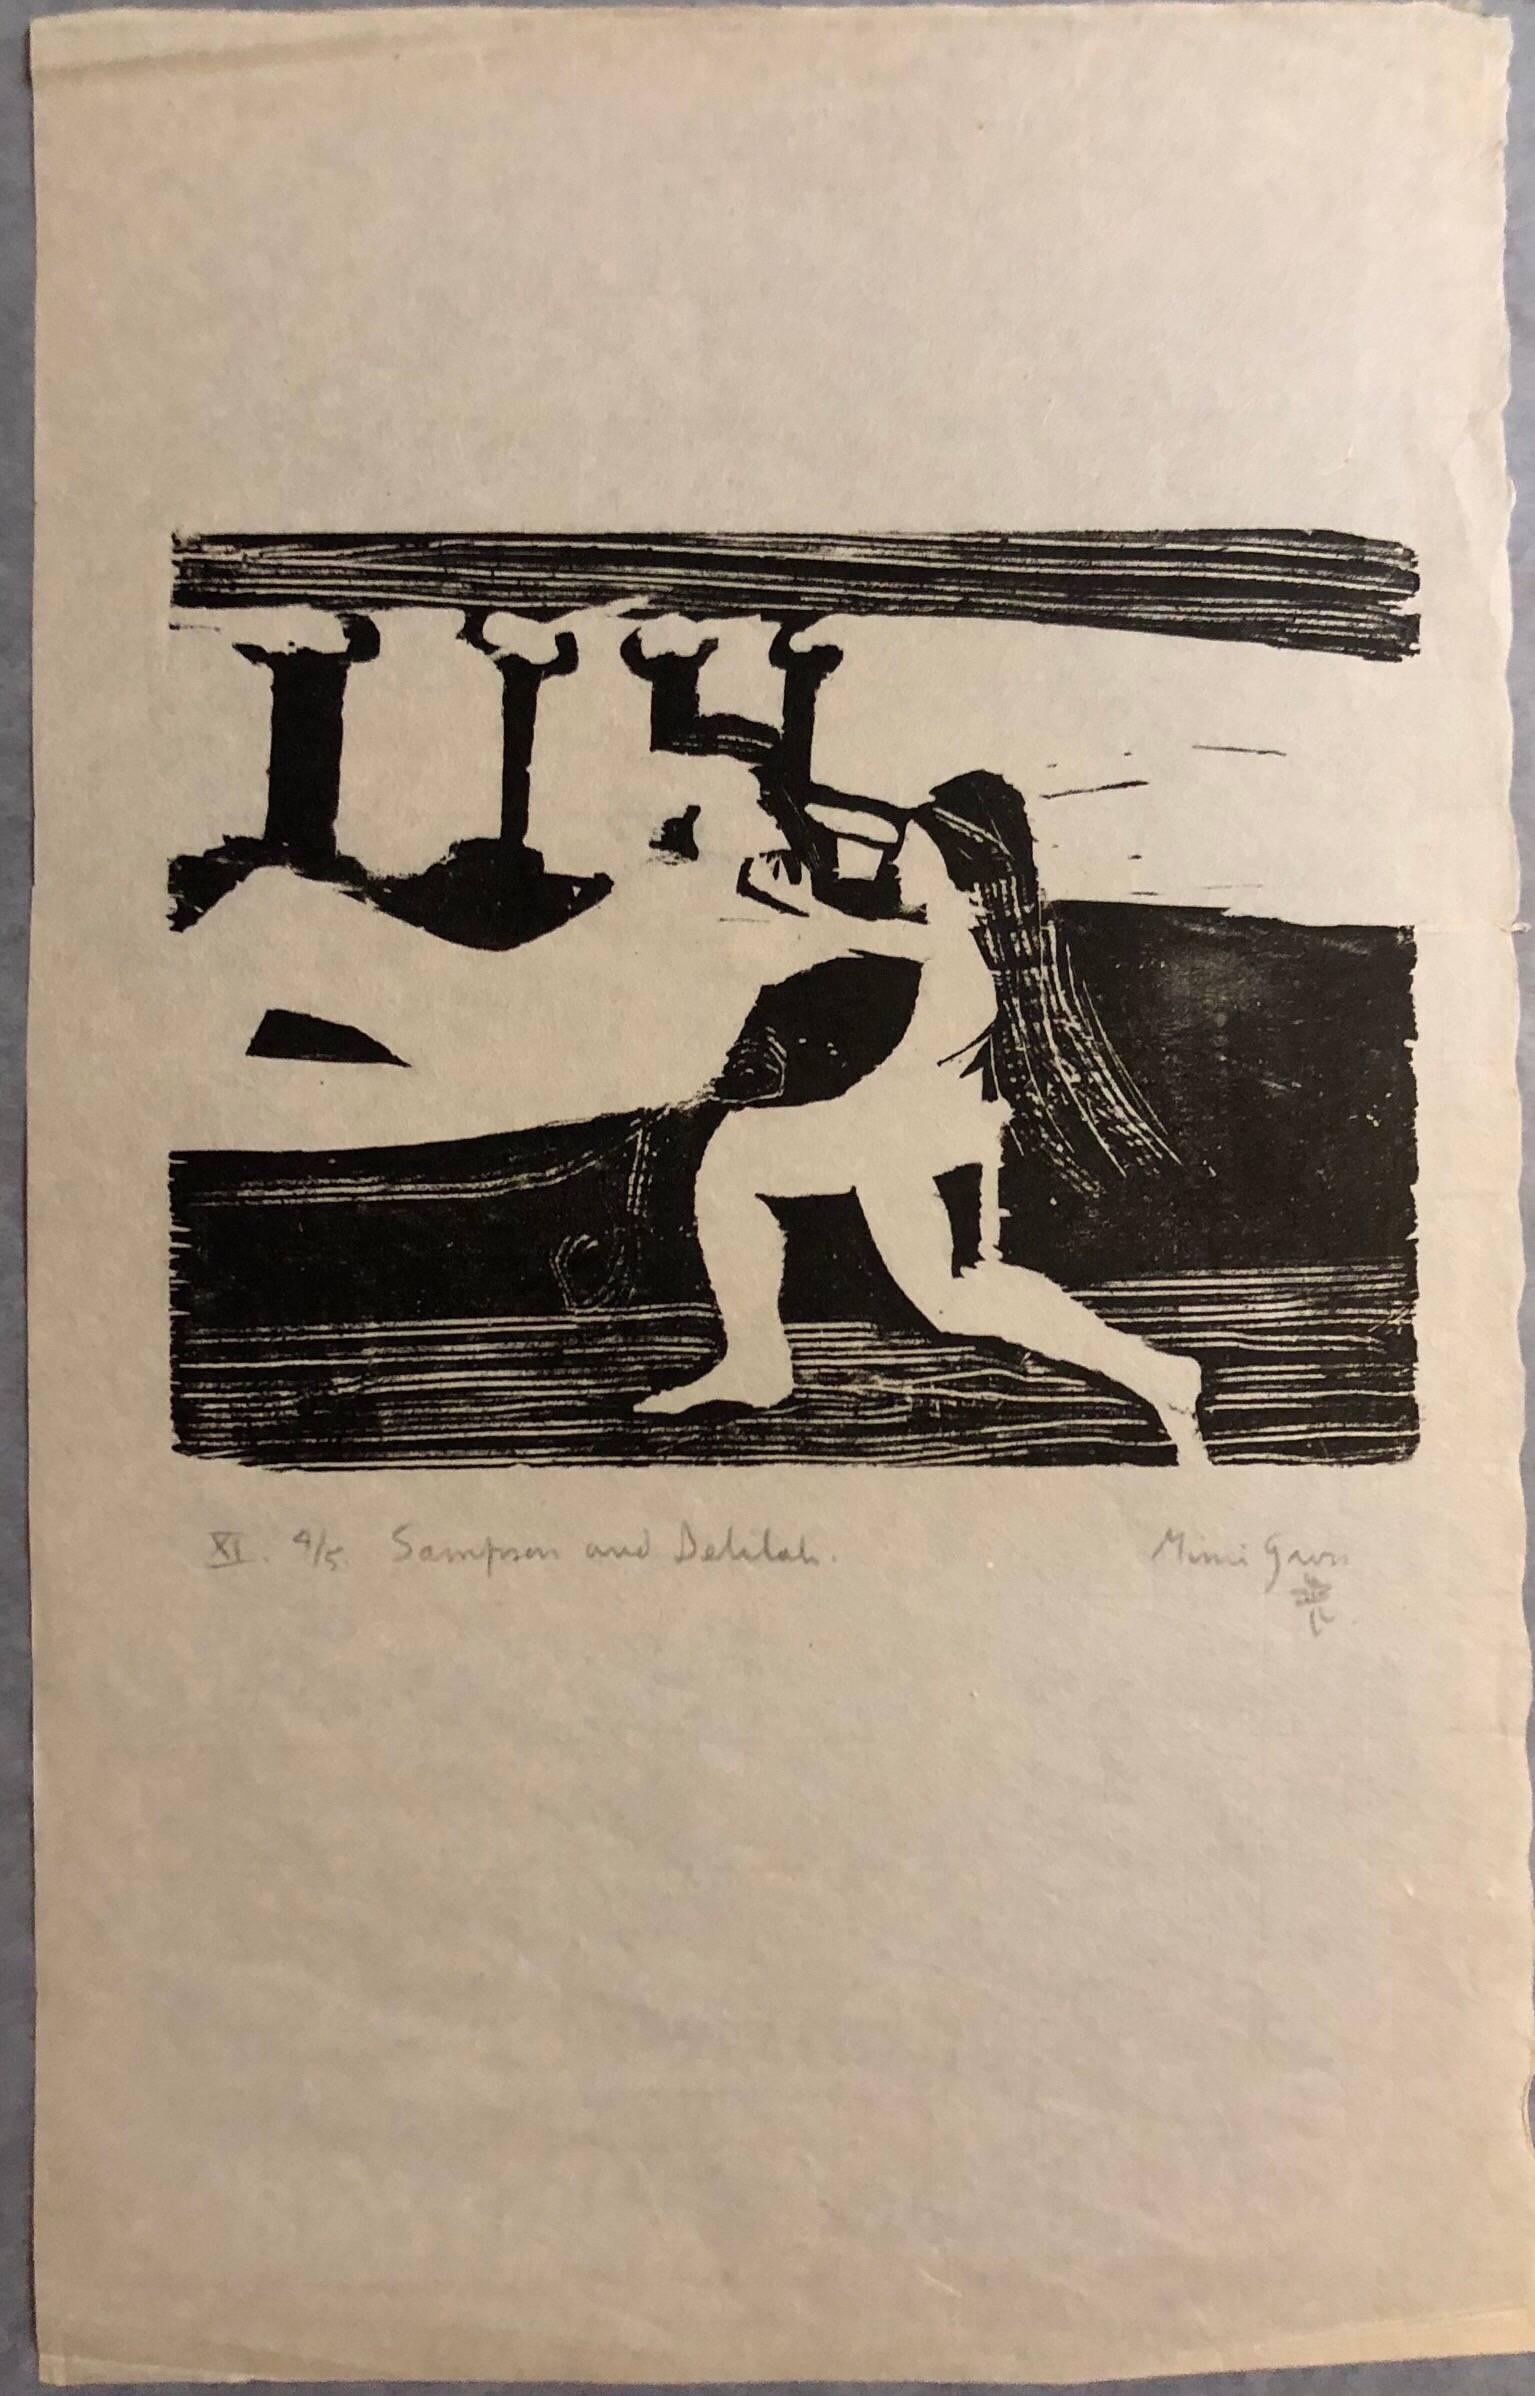 from a portfolio of Biblical woodcut prints. these are pencil signed, titled and numbered 4/5. This one is 'Samson and Delilah '. woodblock prints on a thin tissue like paper. the image is well away from the margins. the margins all have wear. we